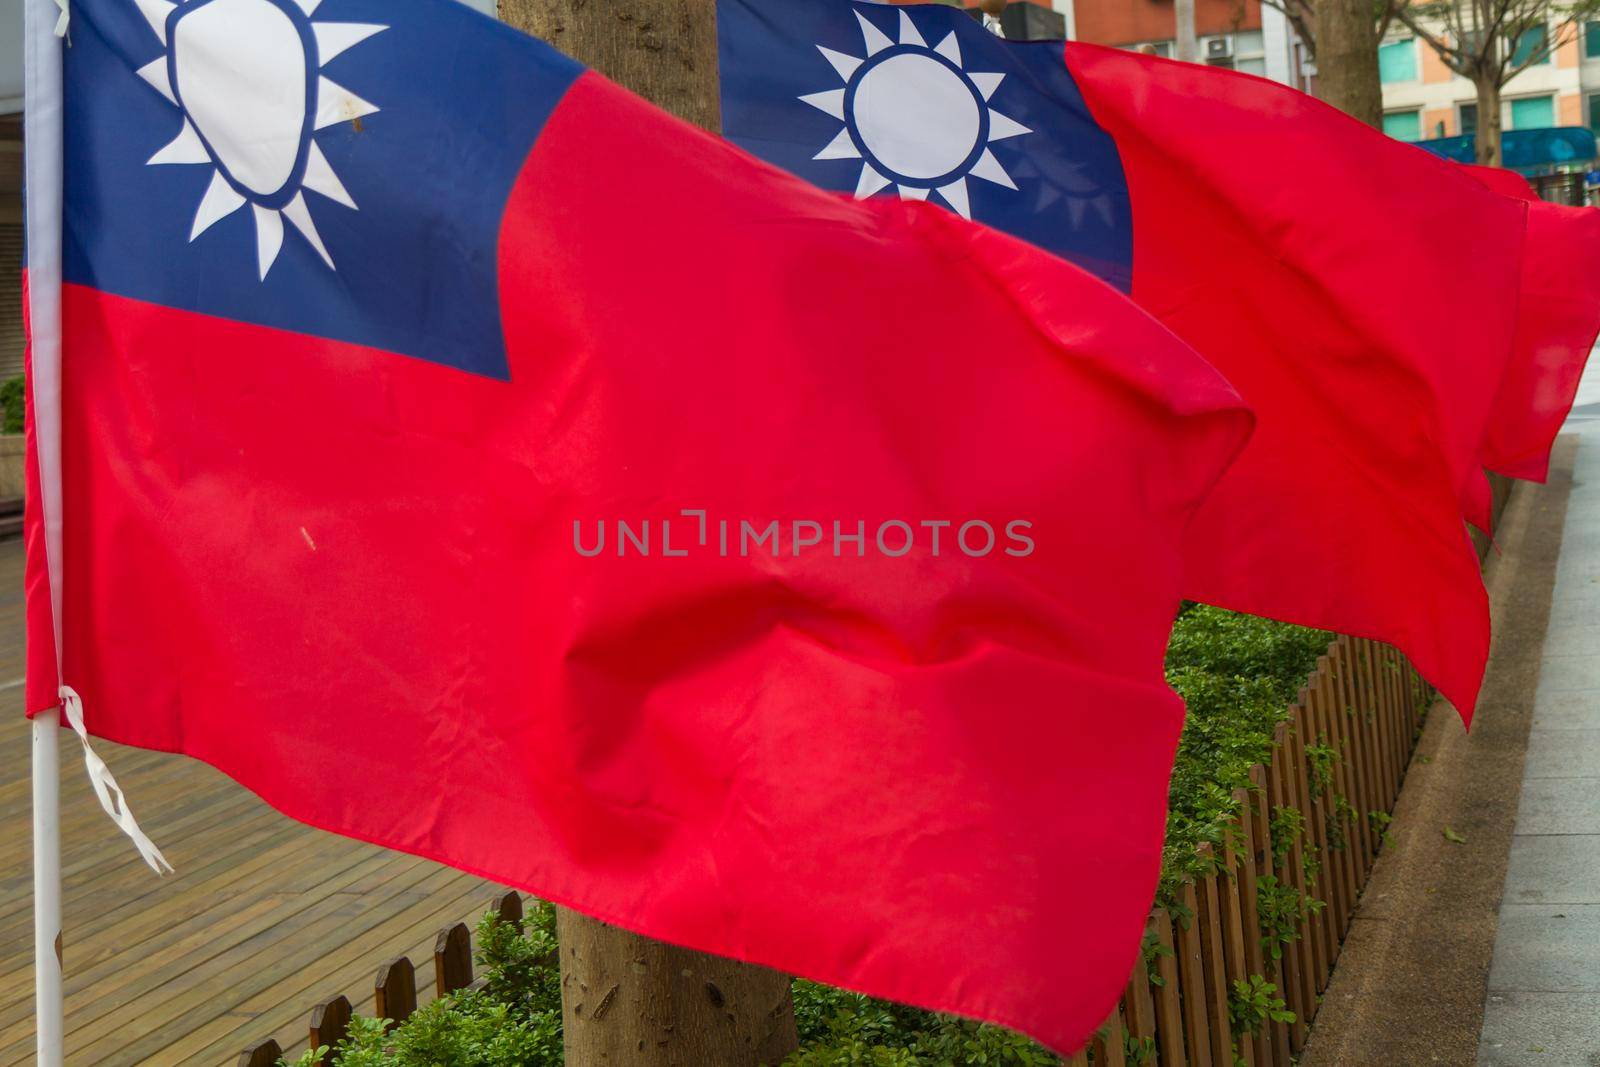 Taiwan Republic of China flags blowing in wind